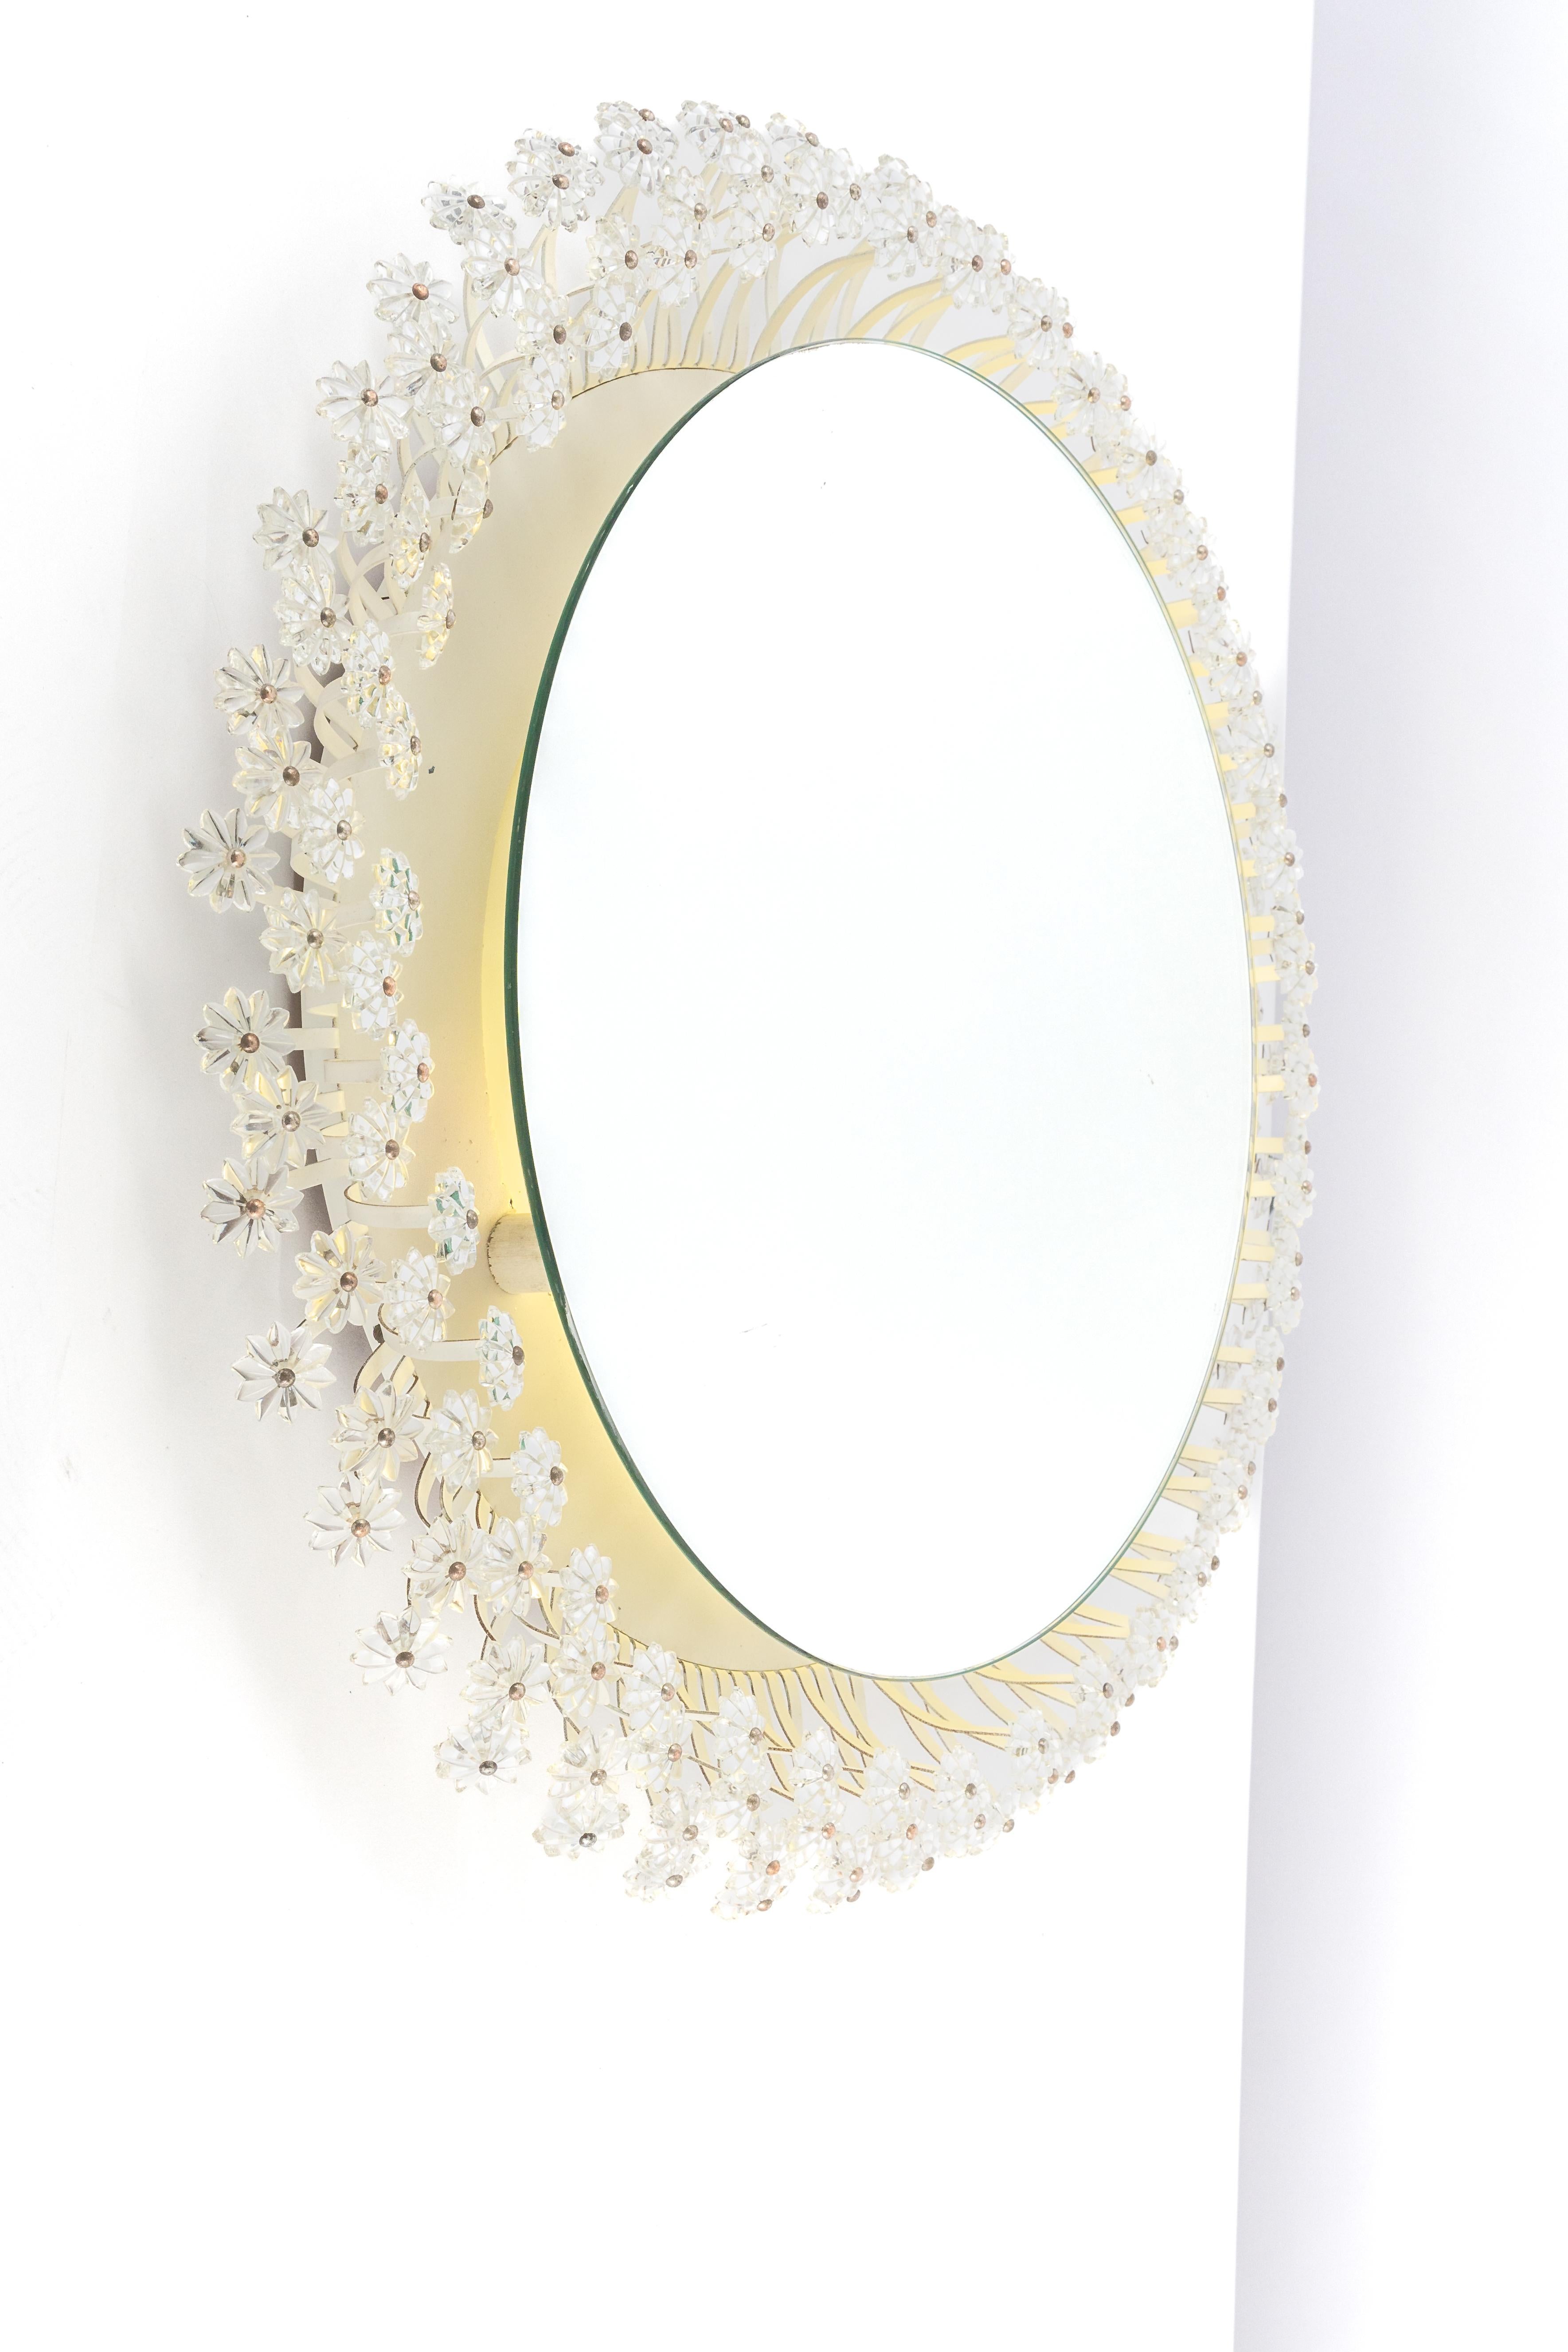 A wonderful and high quality wall mirror by Palwa (Palme & Walter), Germany, 1970s
It is made of a brass frame decorated with hundreds of cut crystal glass. 

High quality and in very good condition. Cleaned, well-wired, and ready to use. 
The